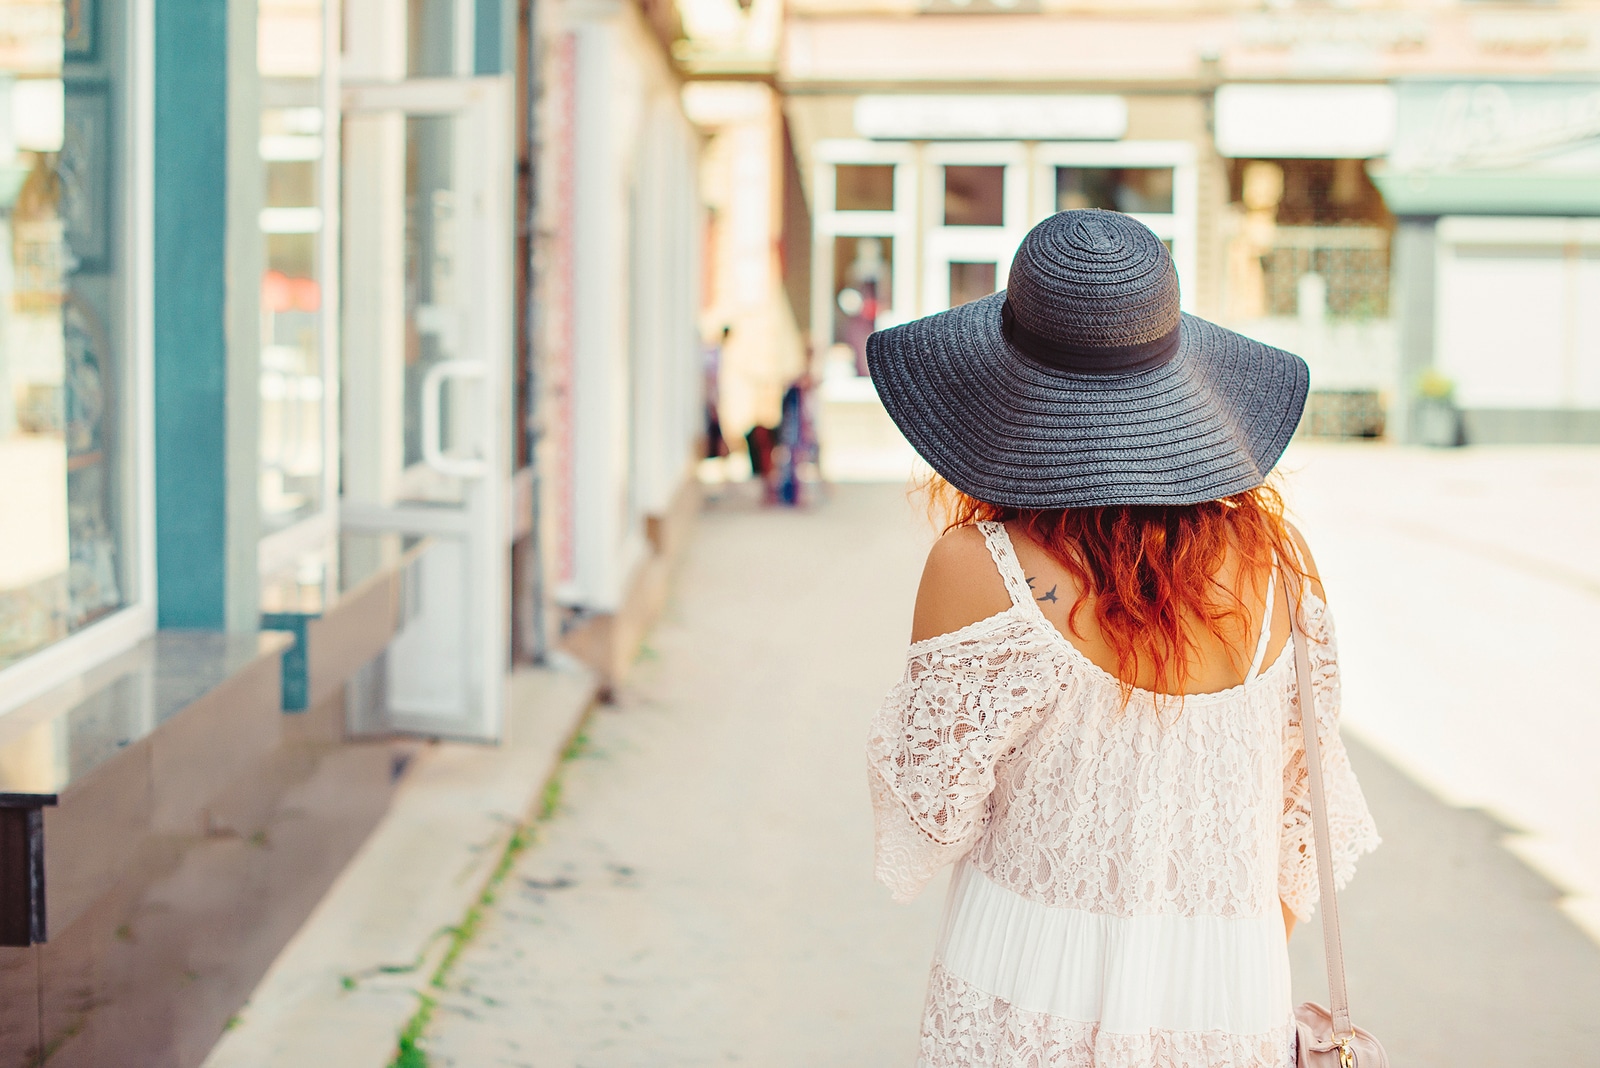 Rear view of a girl with red hair in a black hat walking around the city. Sunny summer day. City style.Girl wearing stylish summer dress of lace.